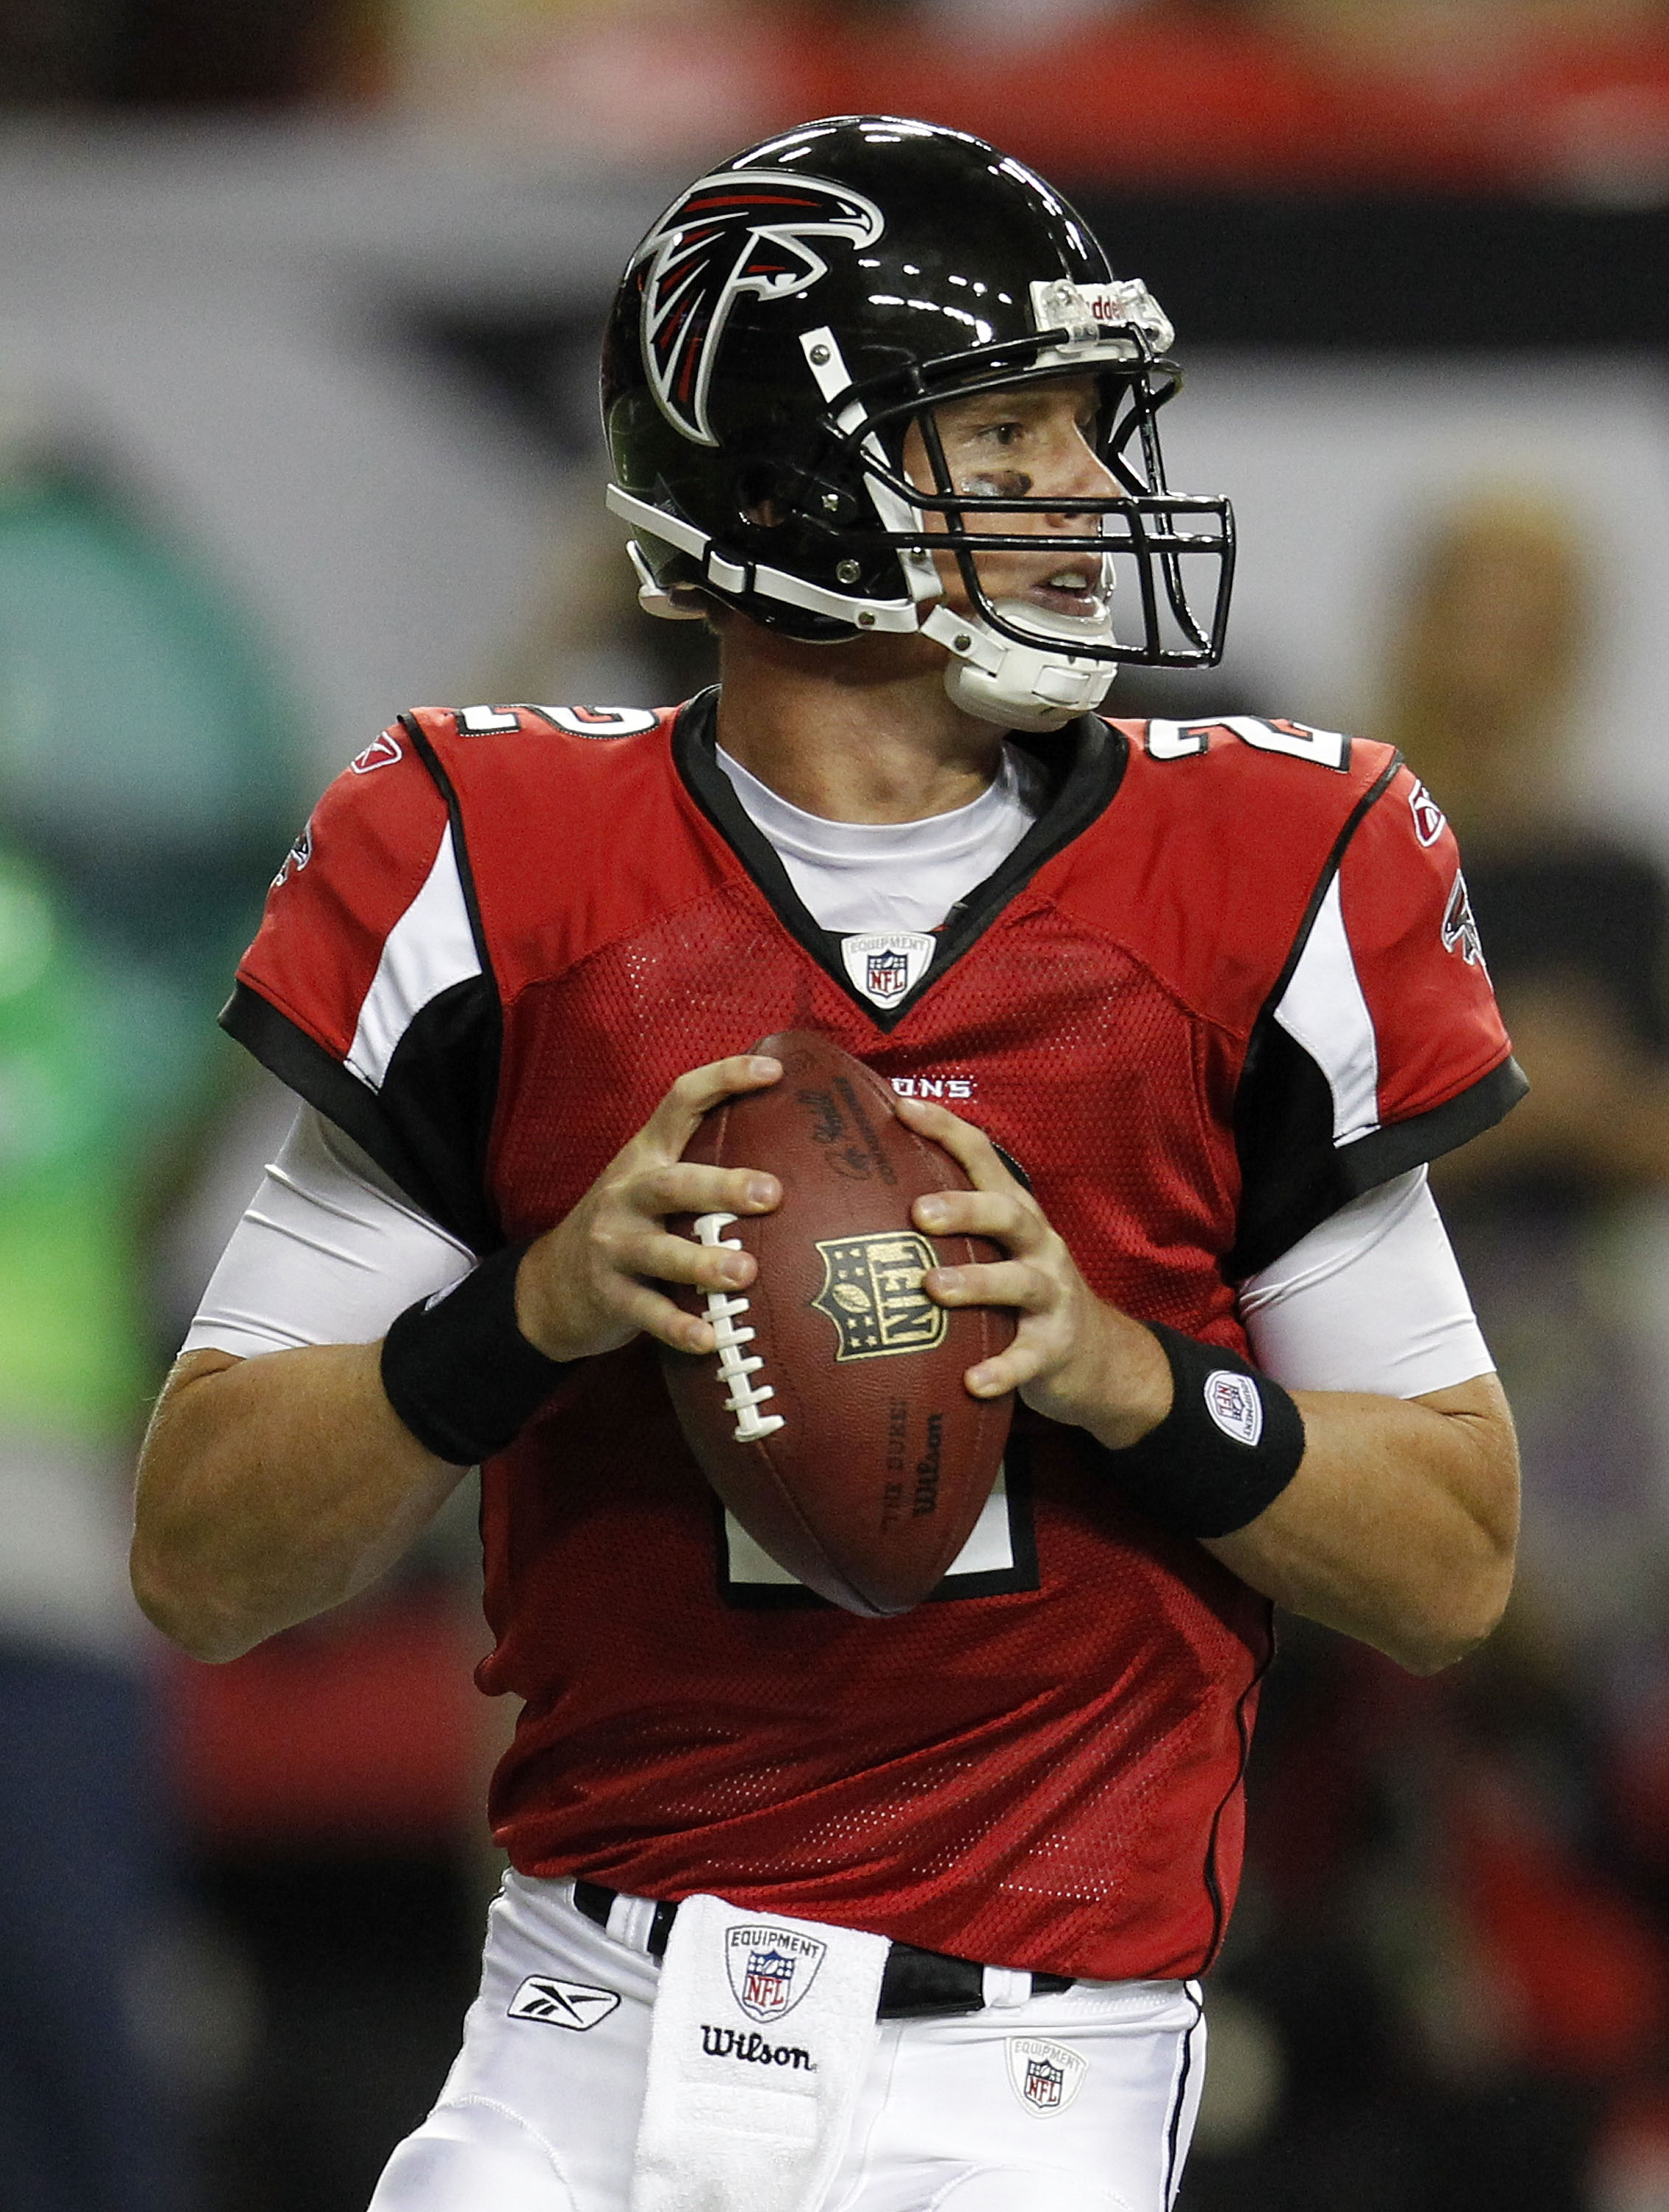 ATLANTA - AUGUST 19:  Quarterback Matt Ryan #2 of the Atlanta Falcons drops back to pass during the preseason game against the New England Patriots at the Georgia Dome on August 19, 2010 in Atlanta, Georgia.  (Photo by Mike Zarrilli/Getty Images)